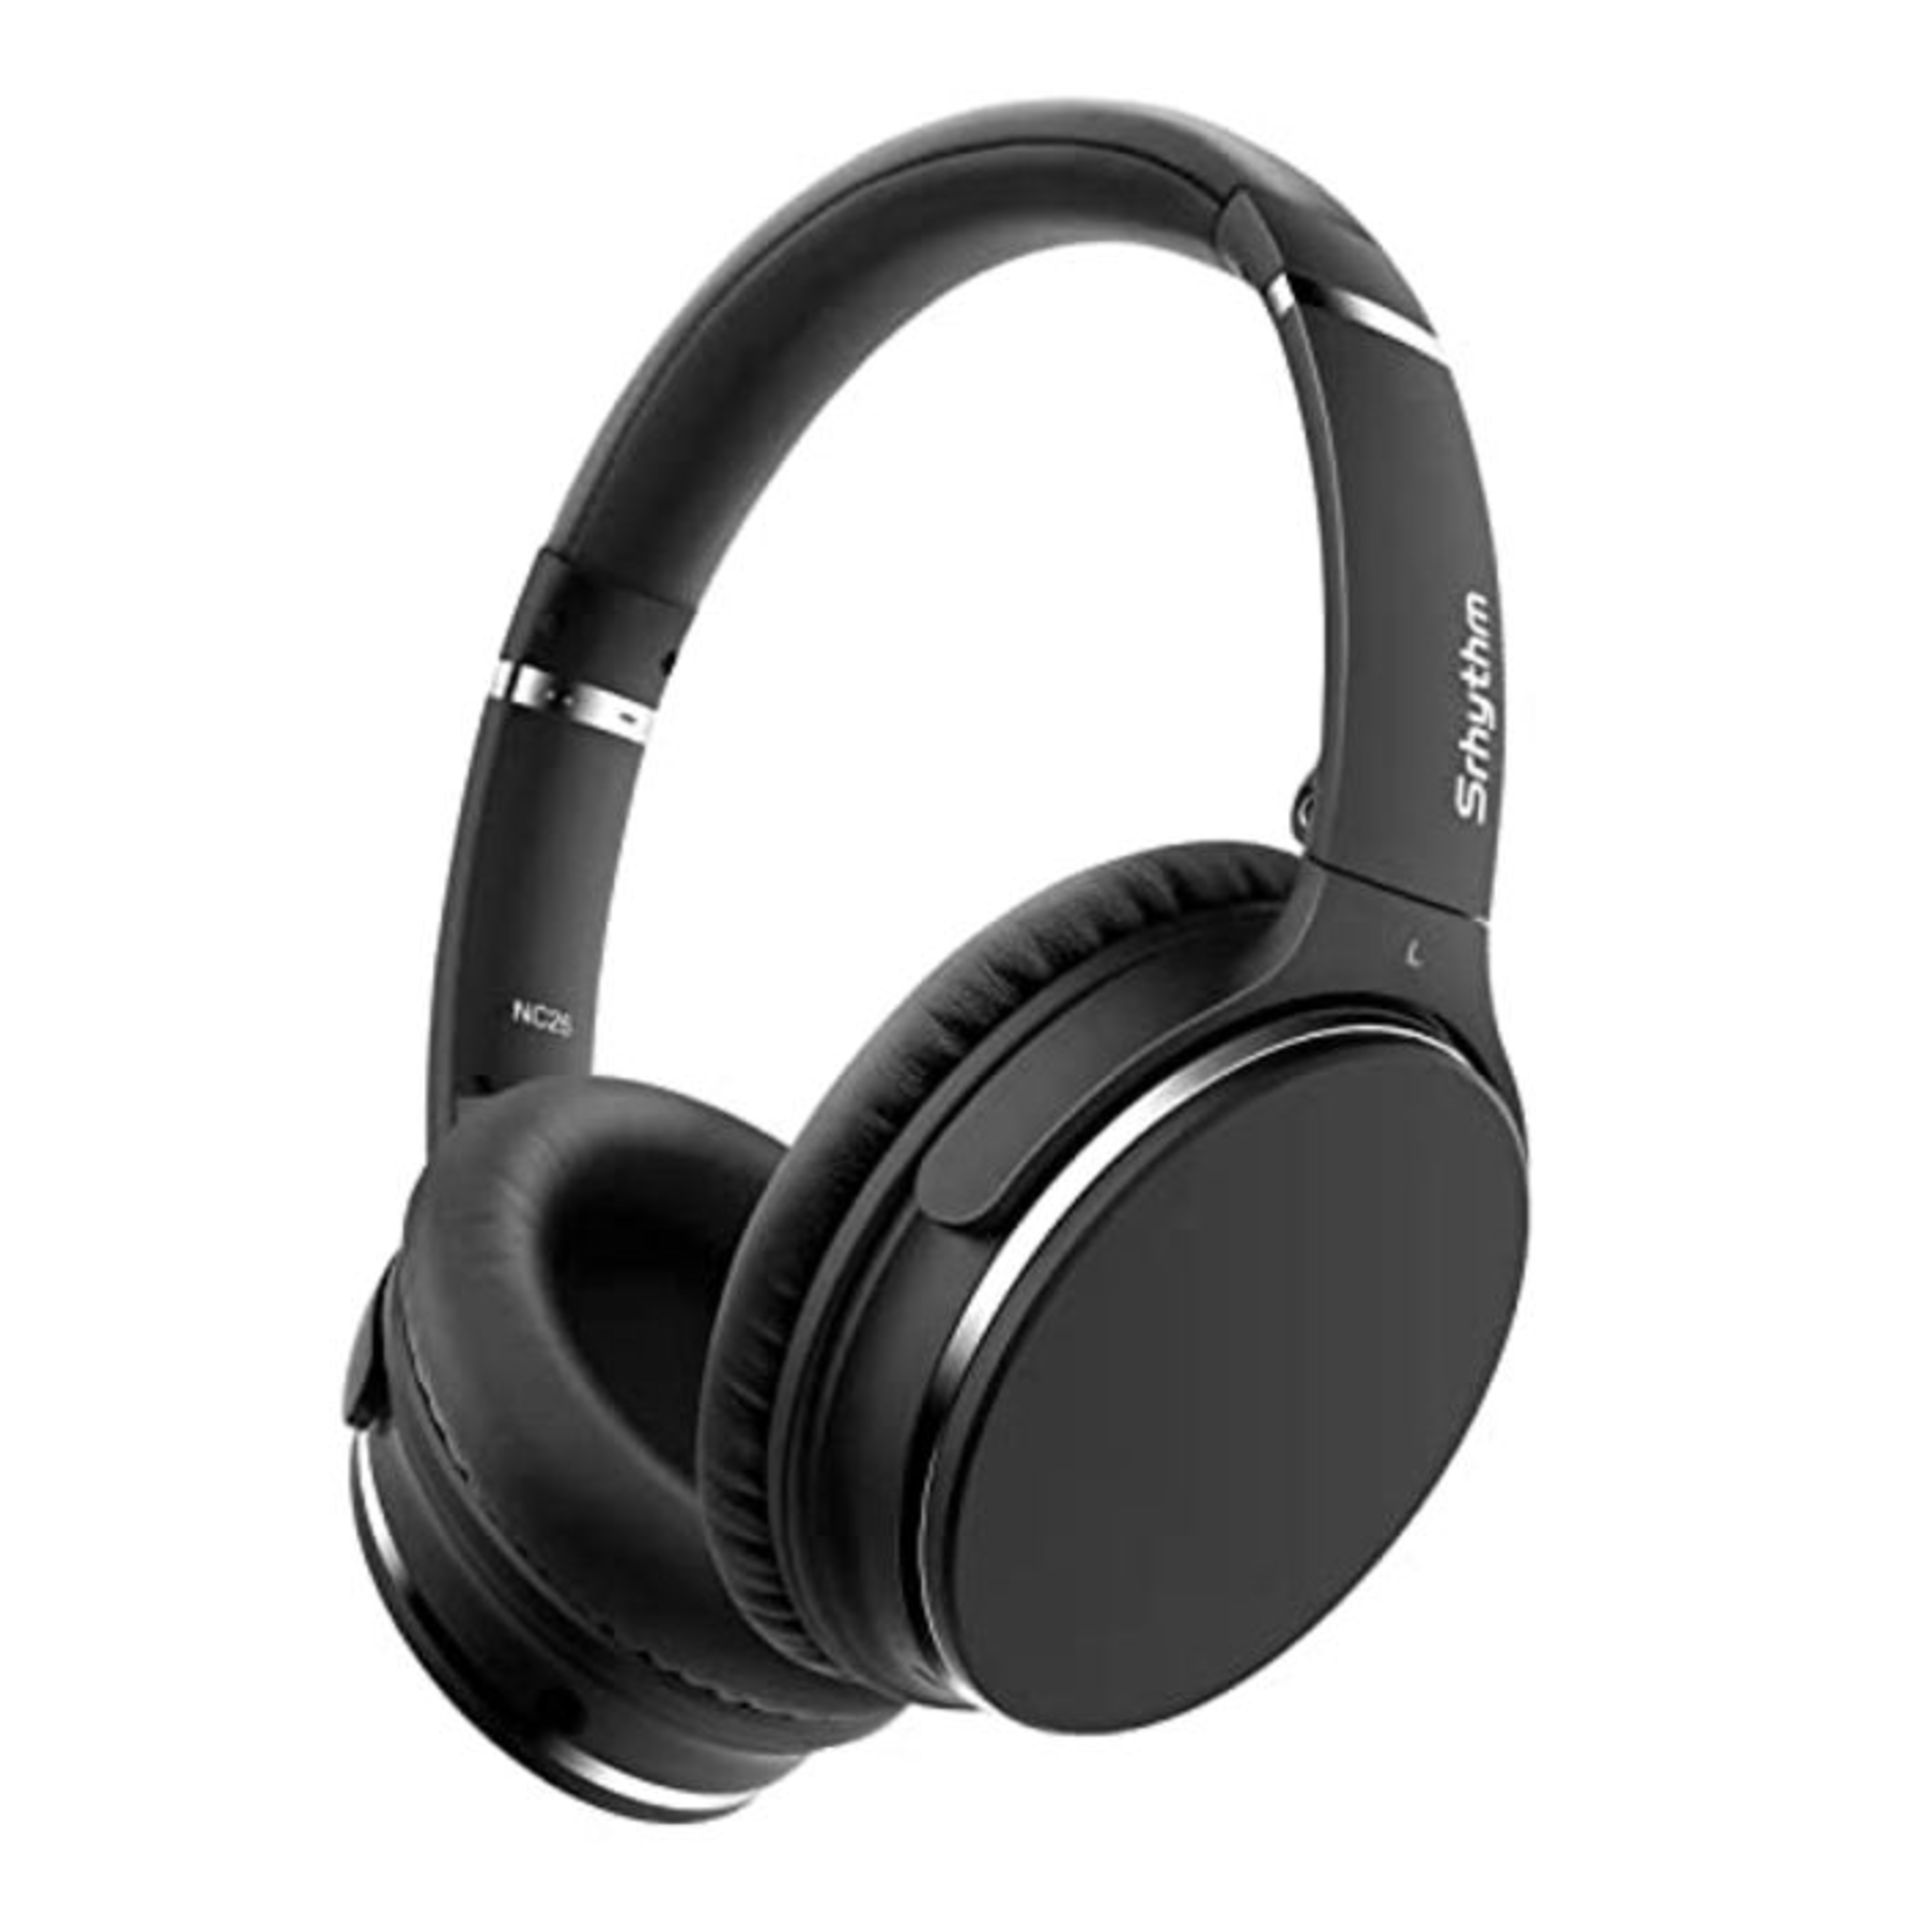 Srhythm NC25 Active Noise Cancelling Stereo Headphones Bluetooth 5.0,ANC Headset Over-